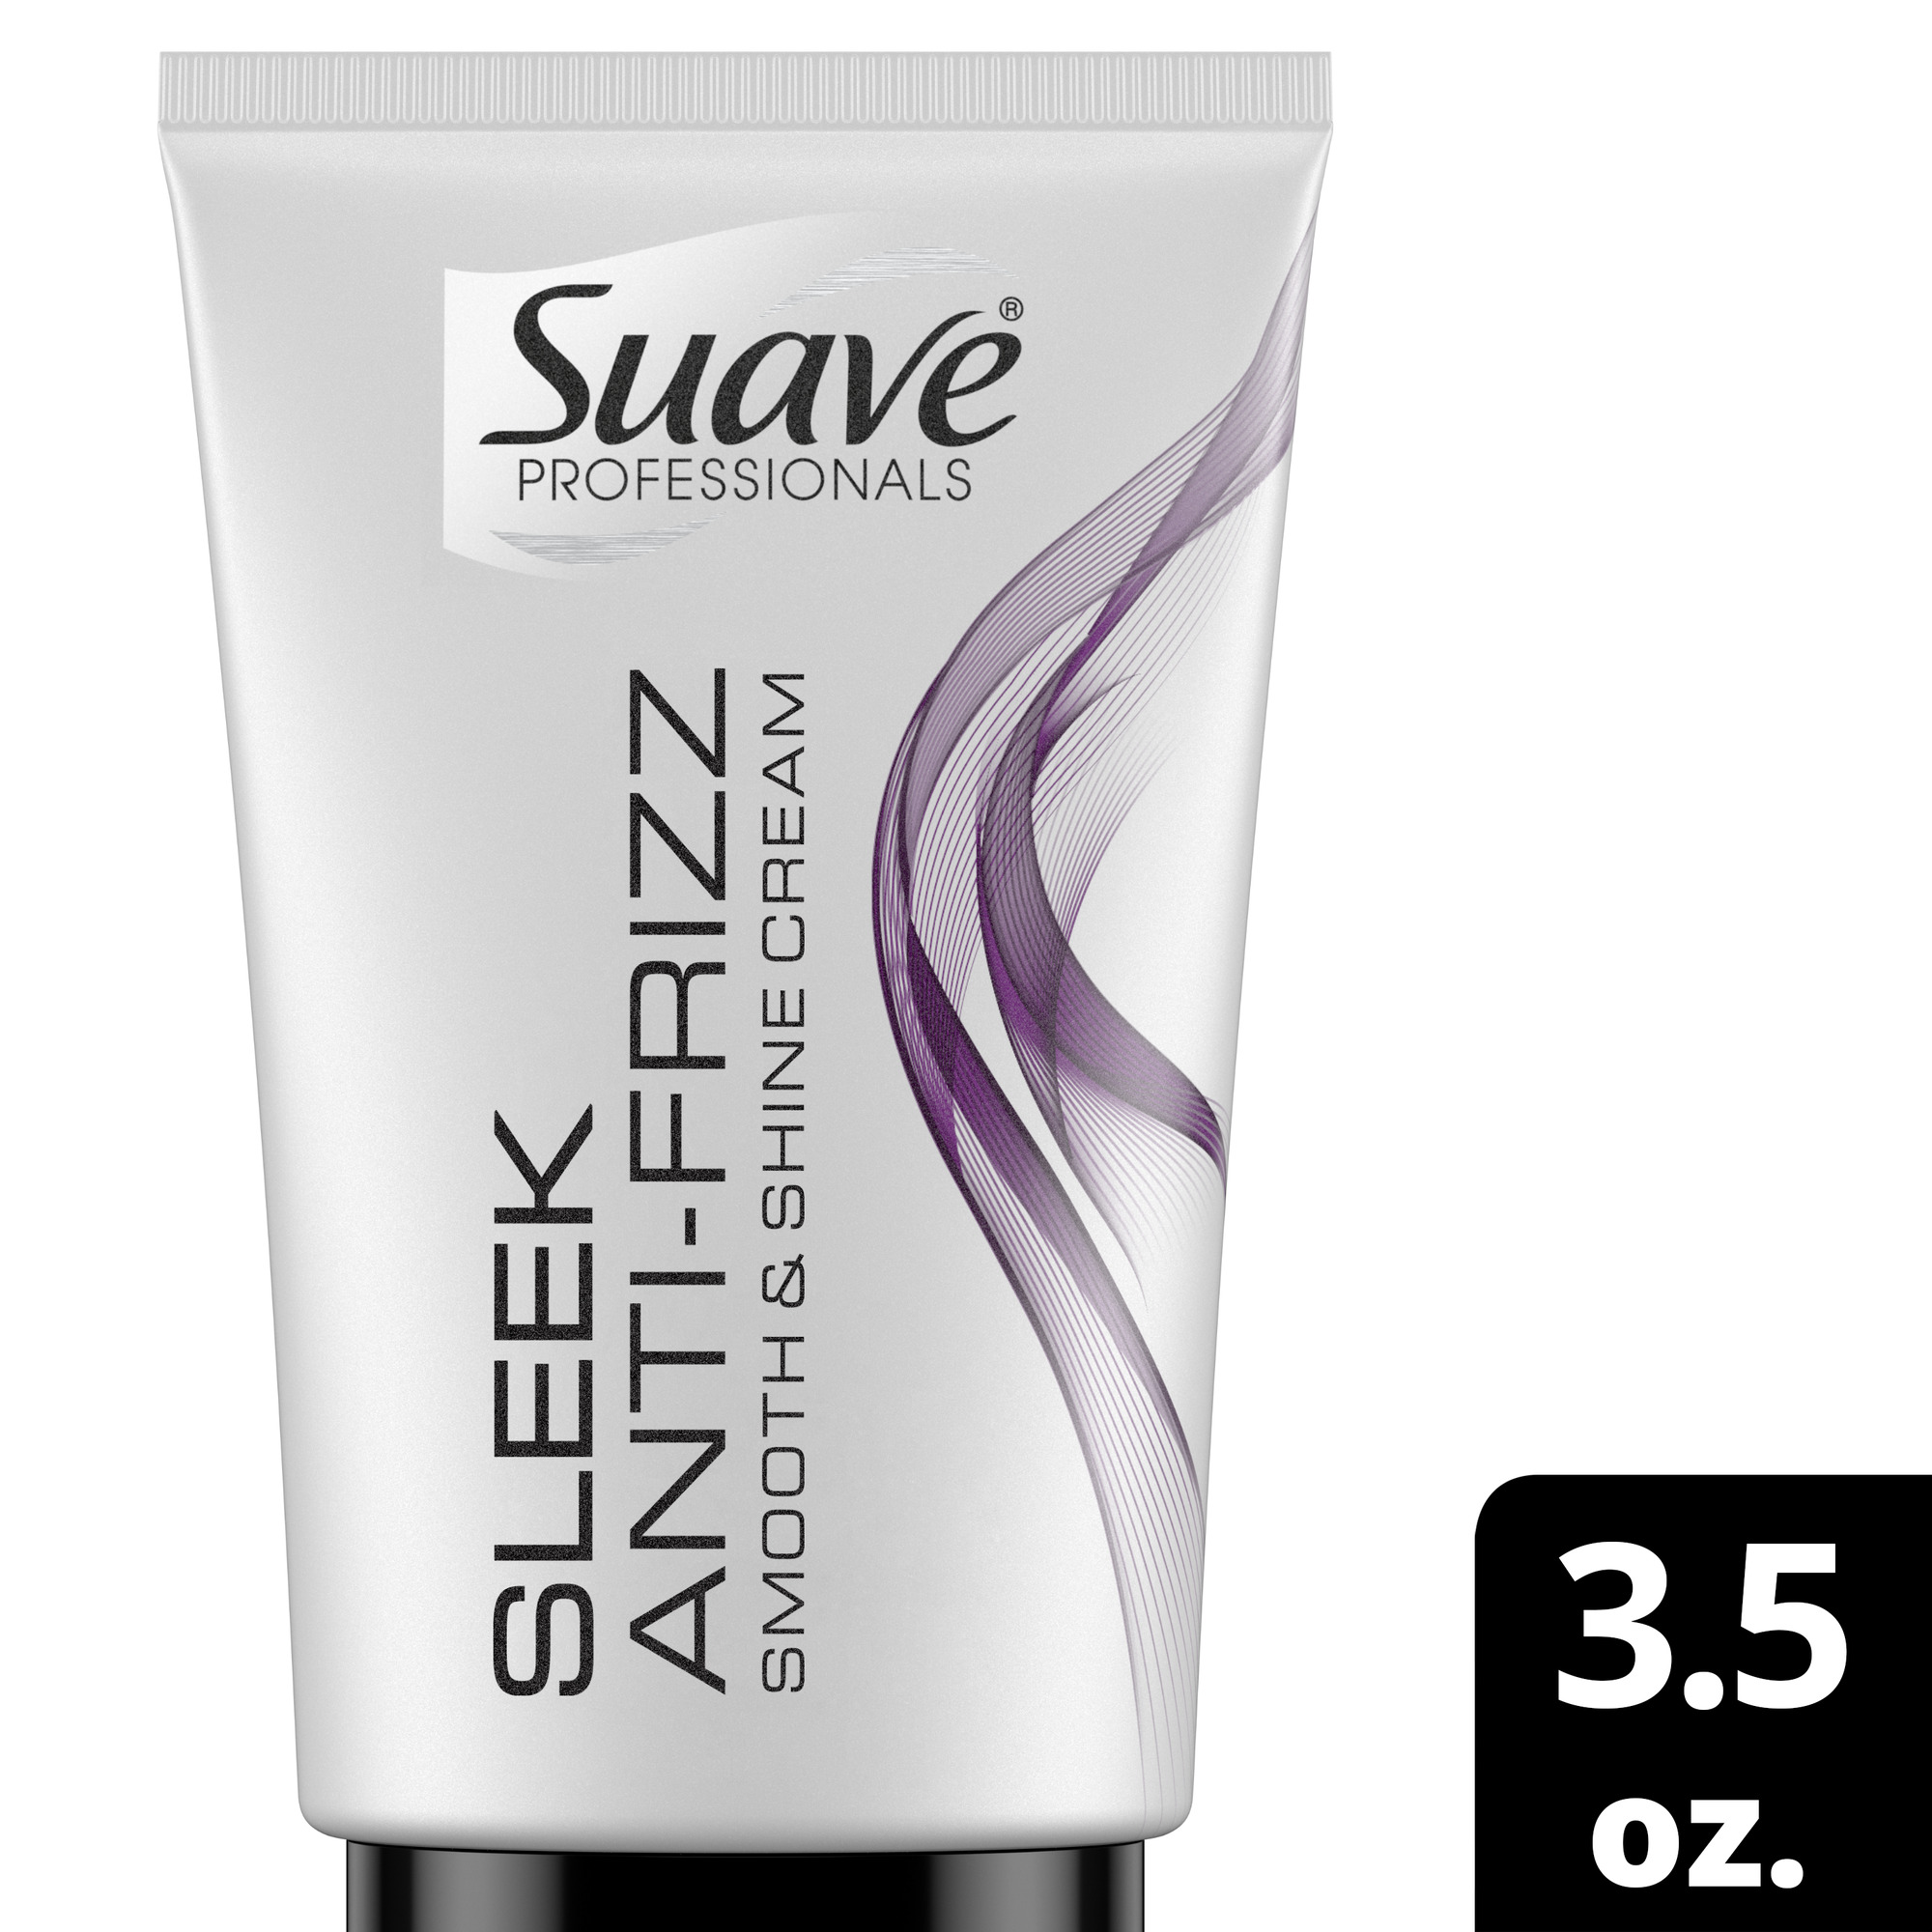 Suave Professionals Frizz Control Shine Enhancing Hair Styling Cream with Vitamin E, 3.5 oz - image 1 of 4